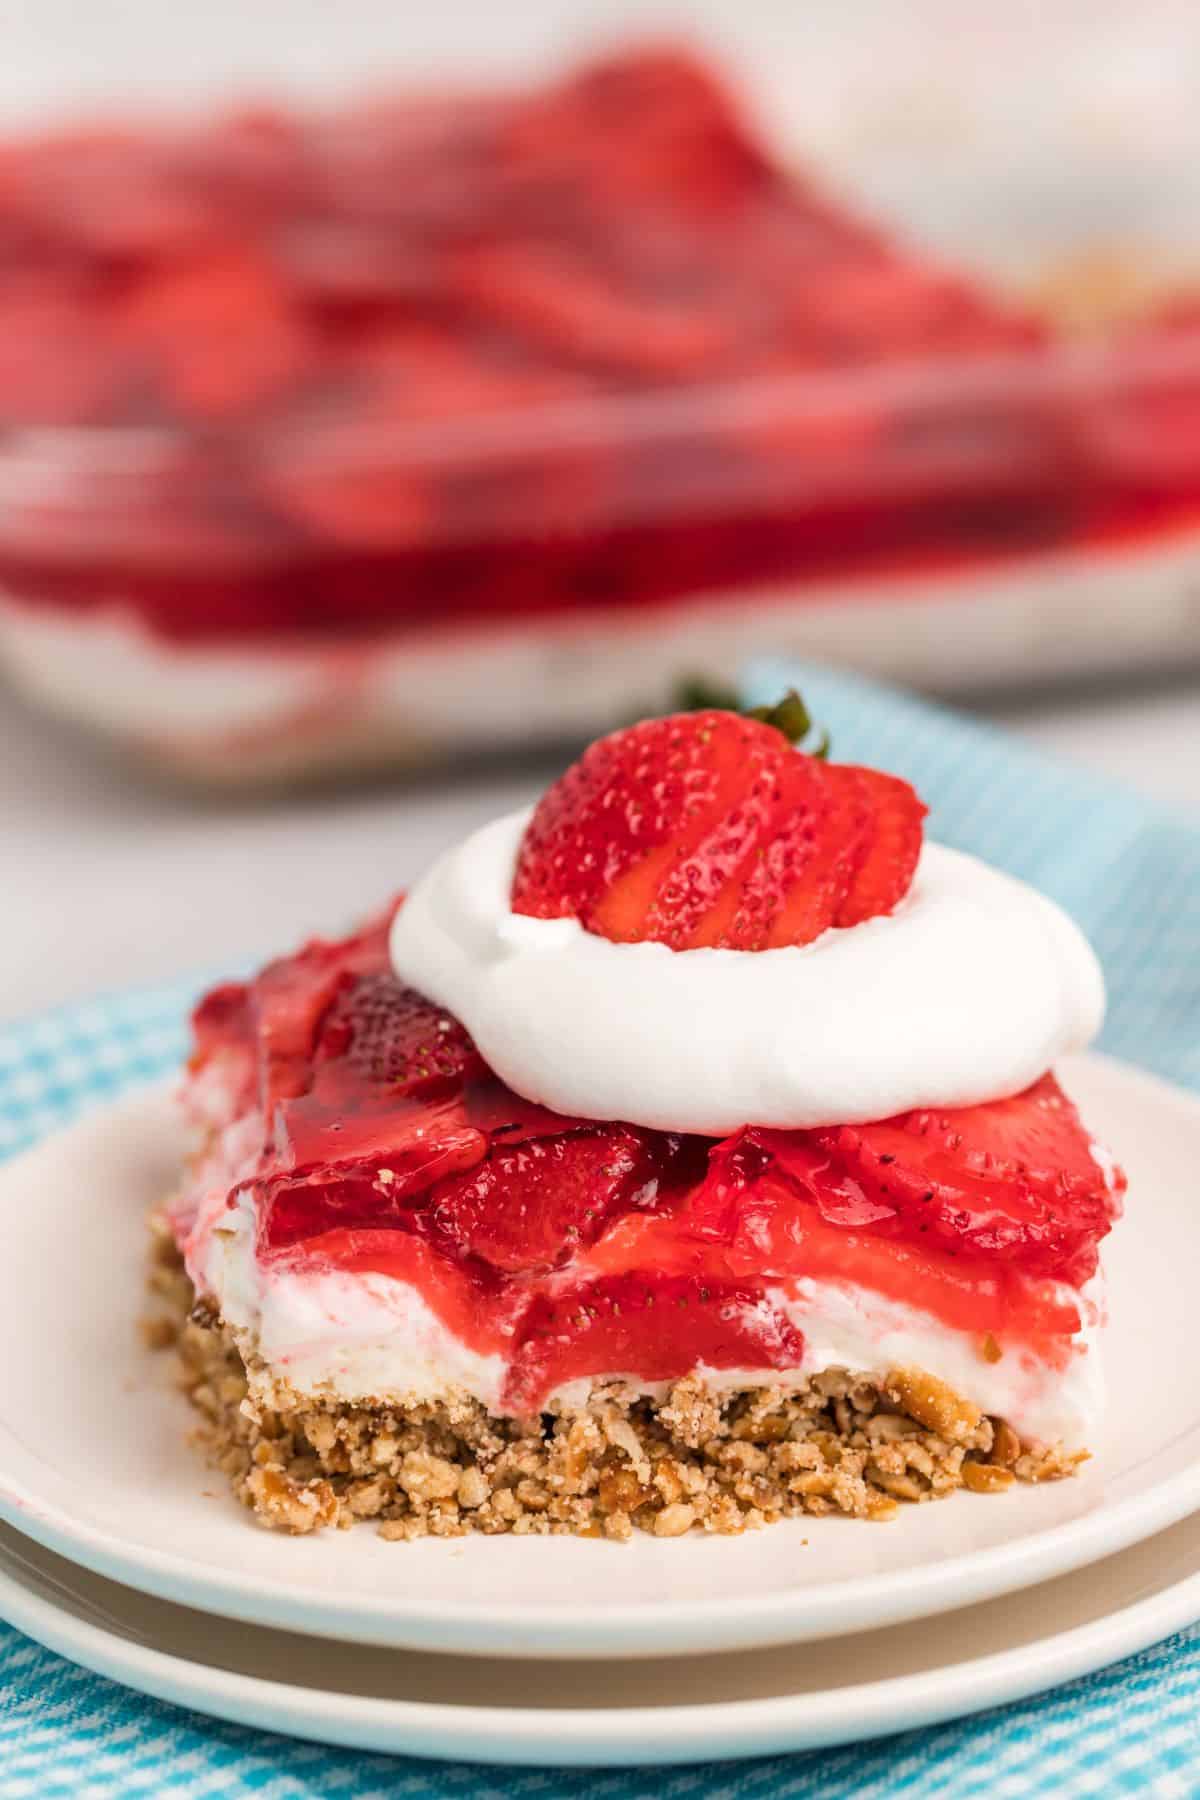 slice of strawberry pretzel salad with whipped cream and a sliced strawberry on top